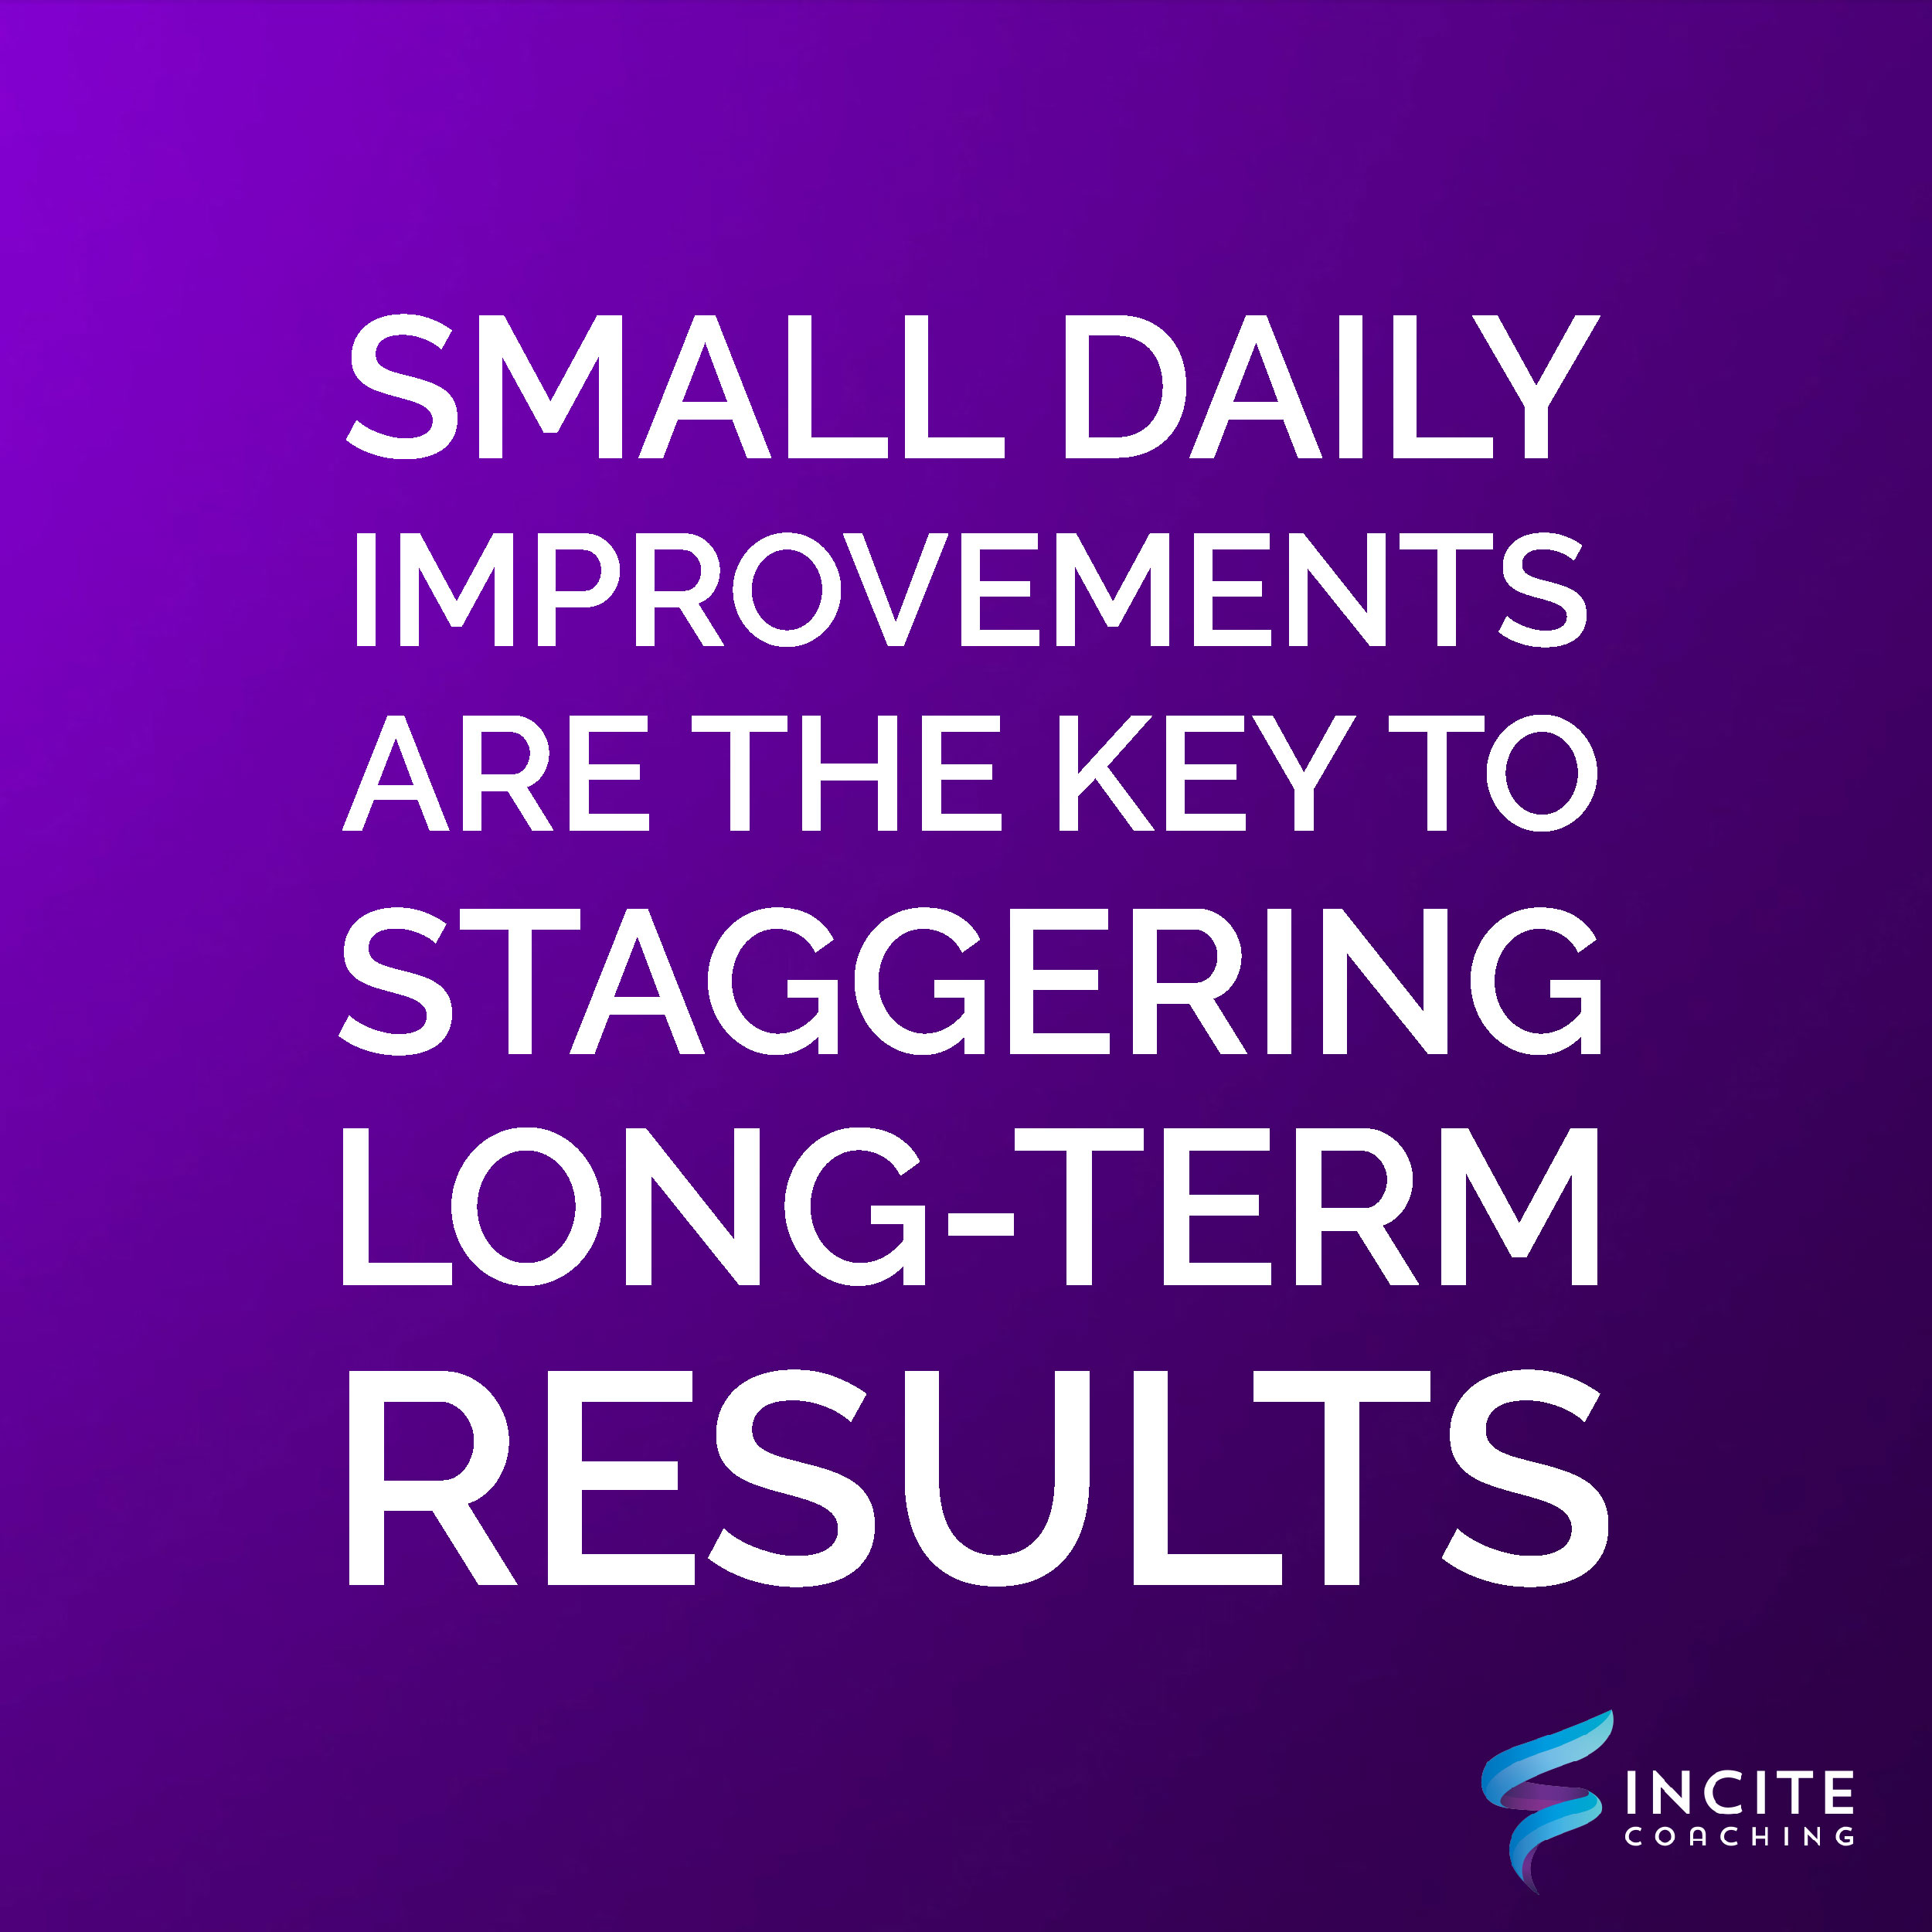 Small Daily Improvements are the Key to Staggering Long-Term Results